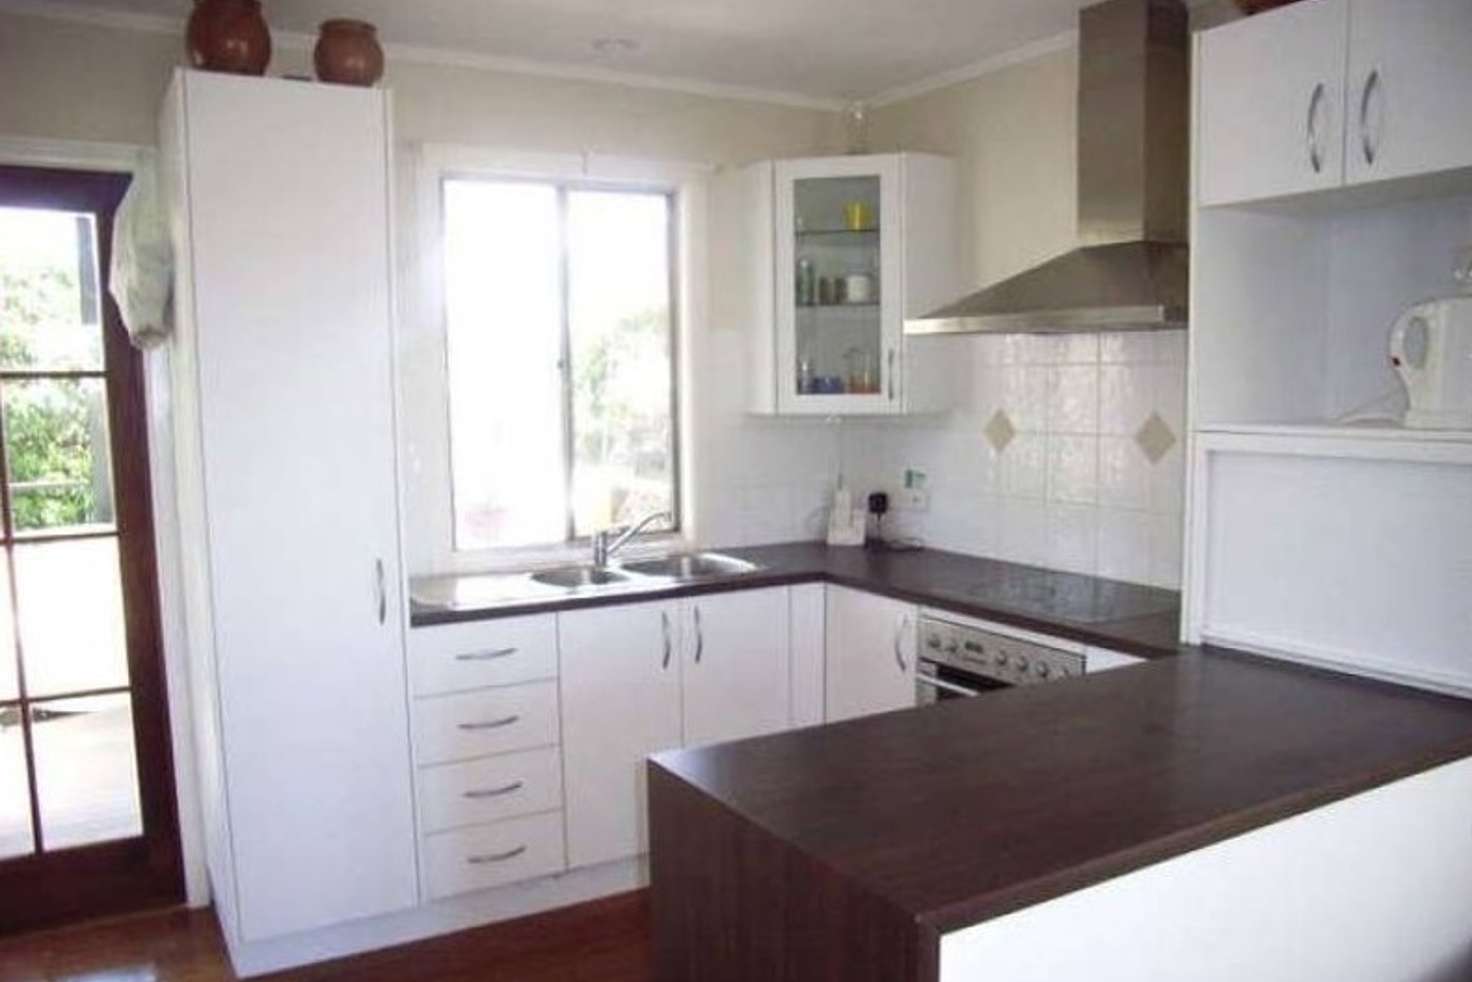 Main view of Homely house listing, 6 Vernon St, Clontarf QLD 4019